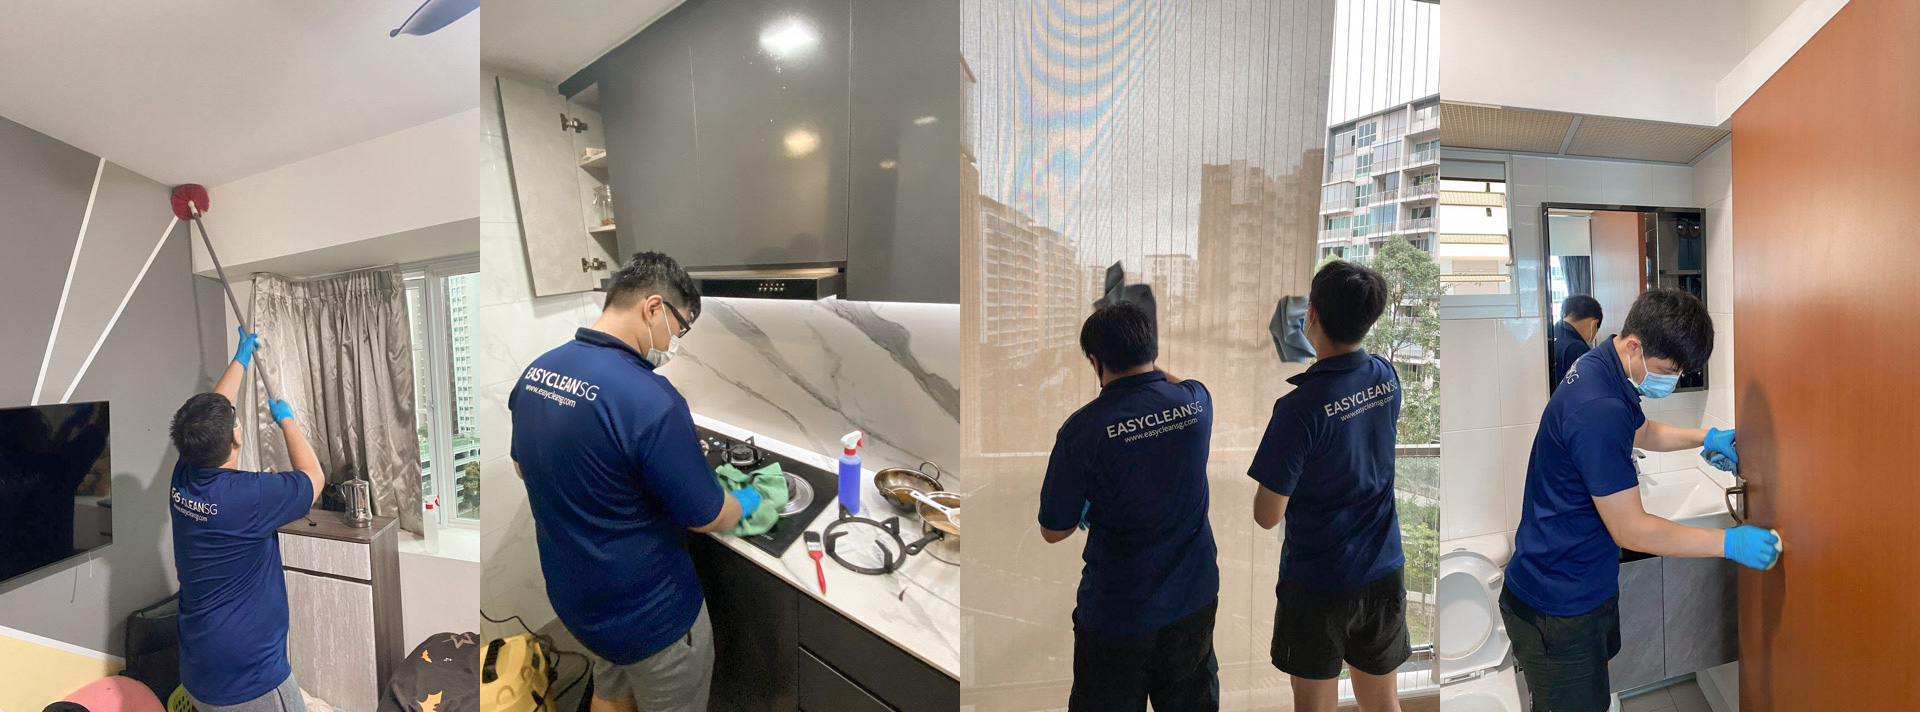 https://www.easycleansg.com/pages/move-out-cleaning-service